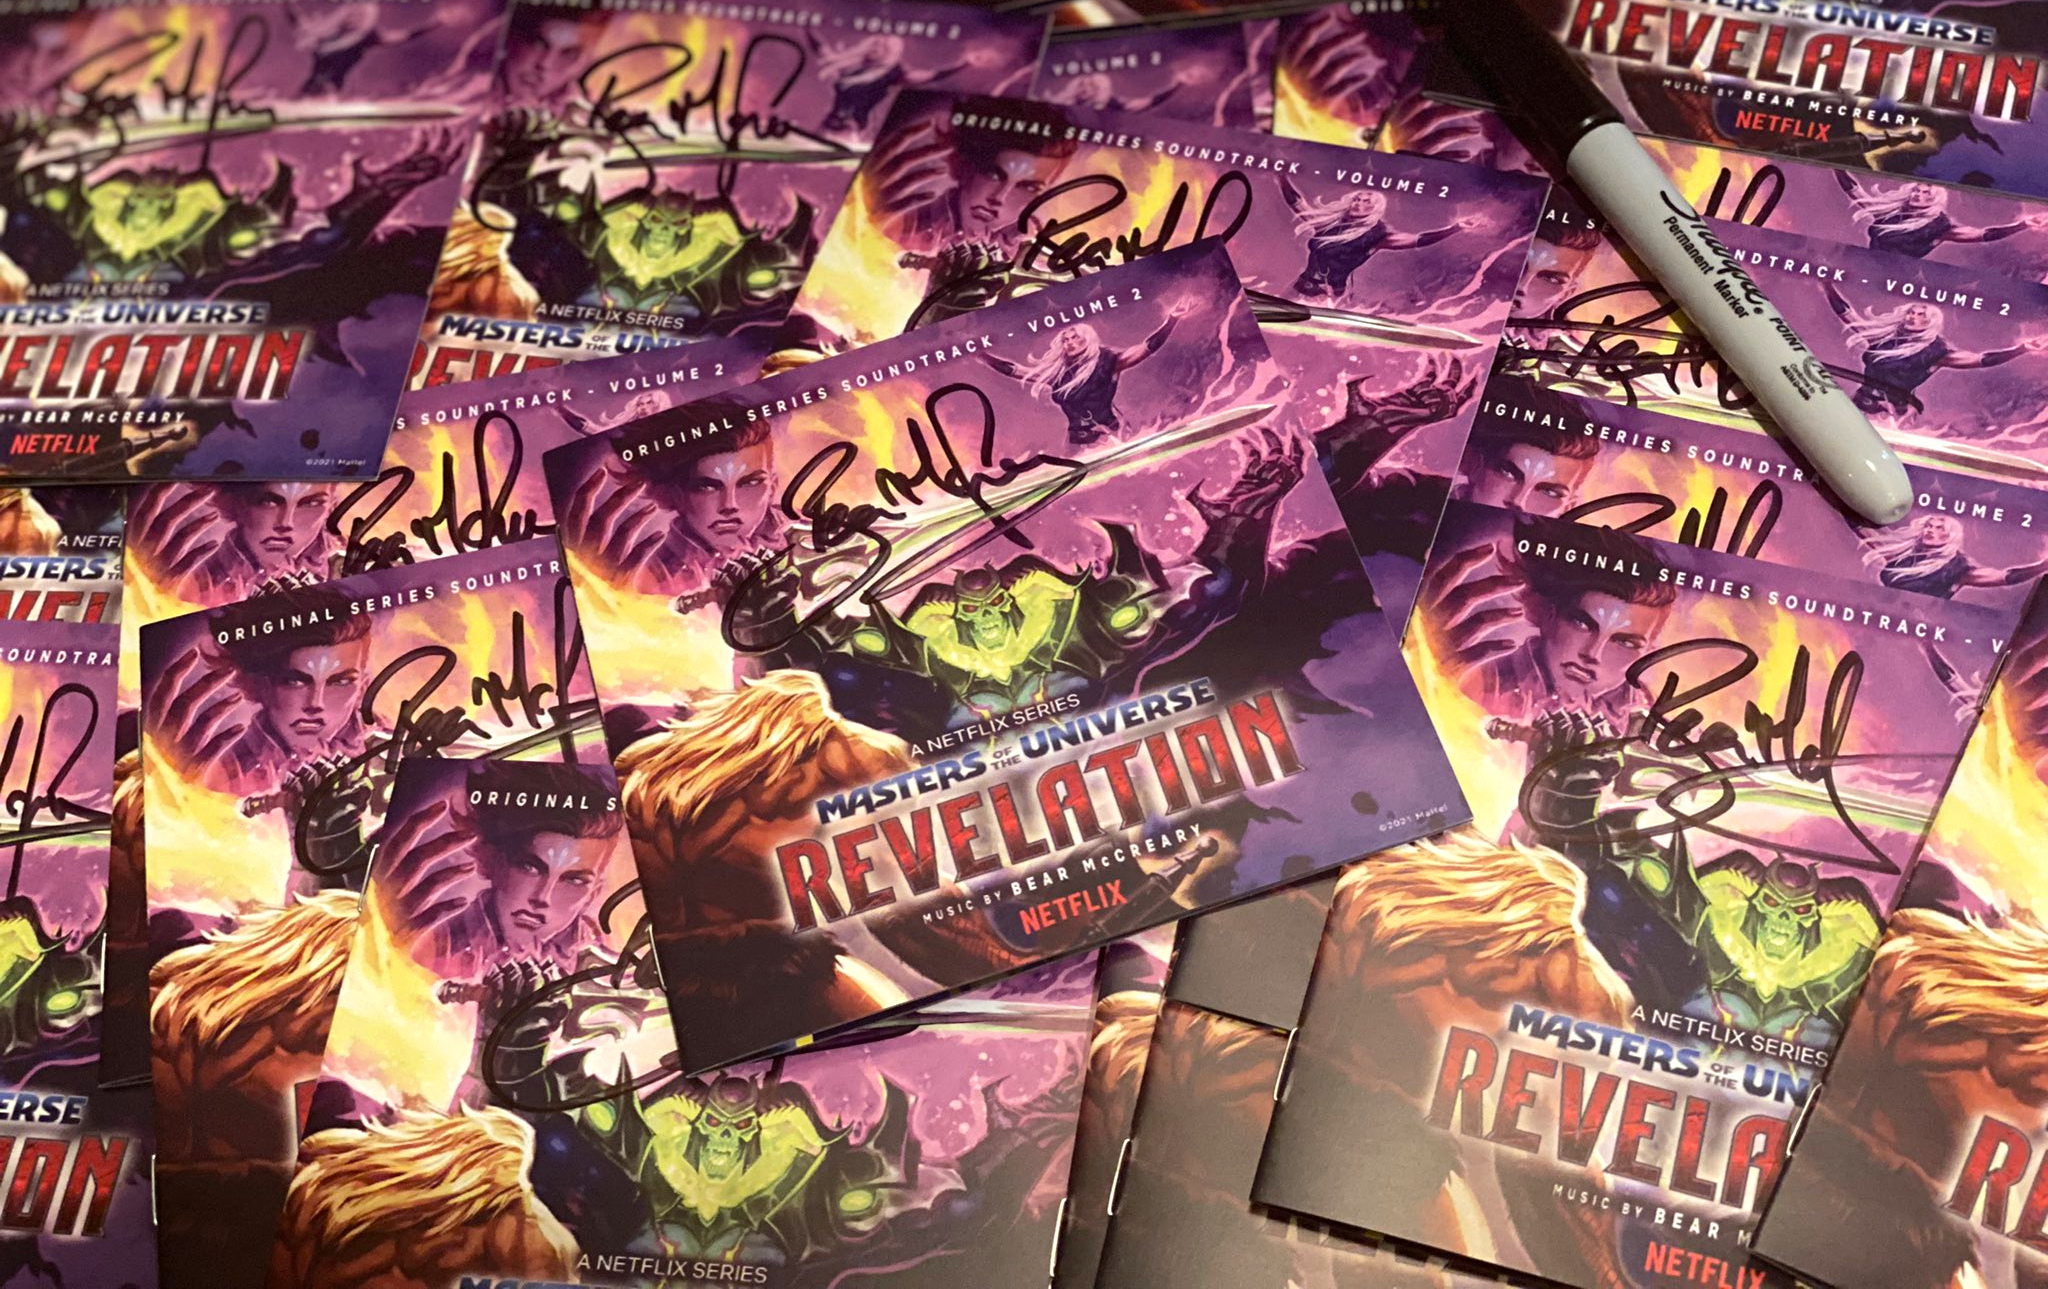 IT’S HERE! Signed Copies of Bear McCreary’s epic ”Masters of the Universe: Revelation” score, Vol.2 are now available!